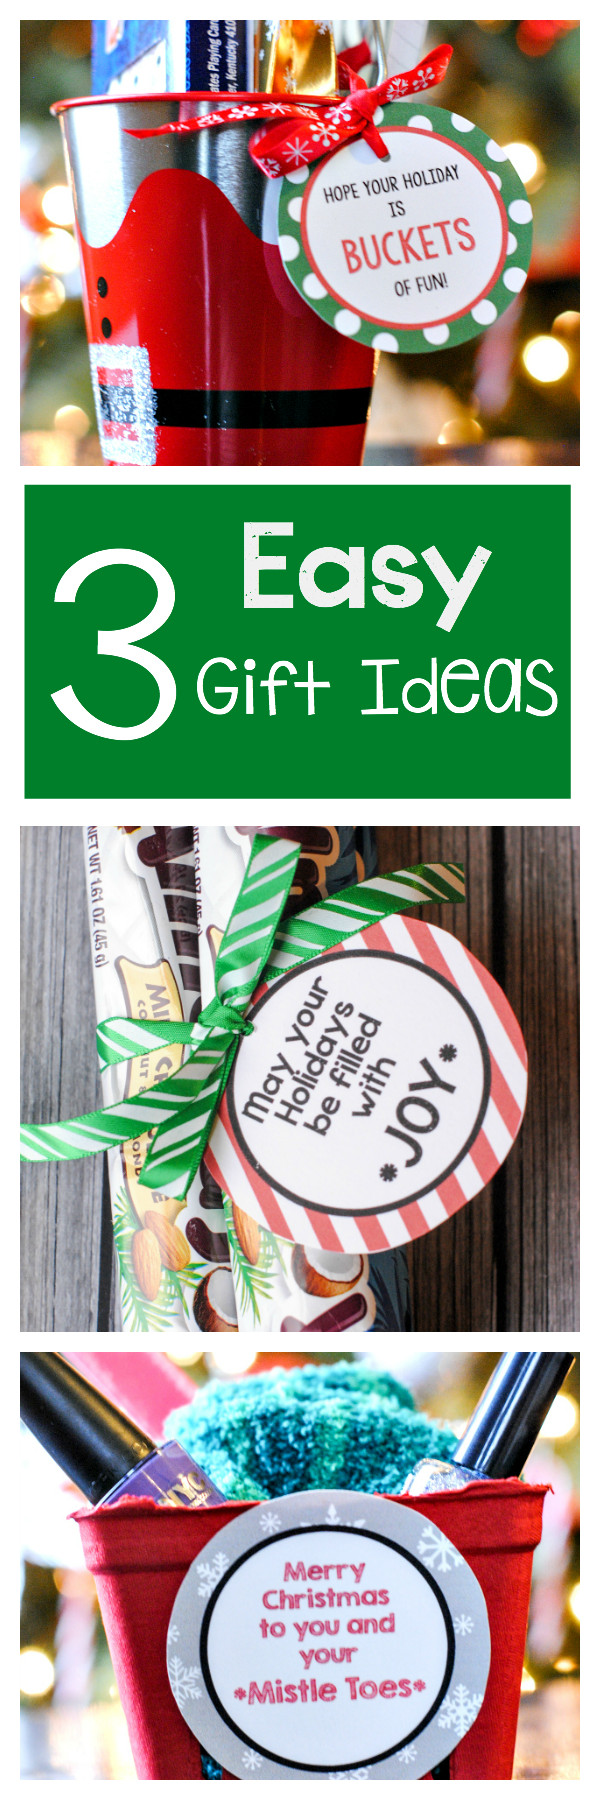 Simple Christmas Gift Ideas
 3 Easy Gifts Ideas for Friends Crazy Little Projects